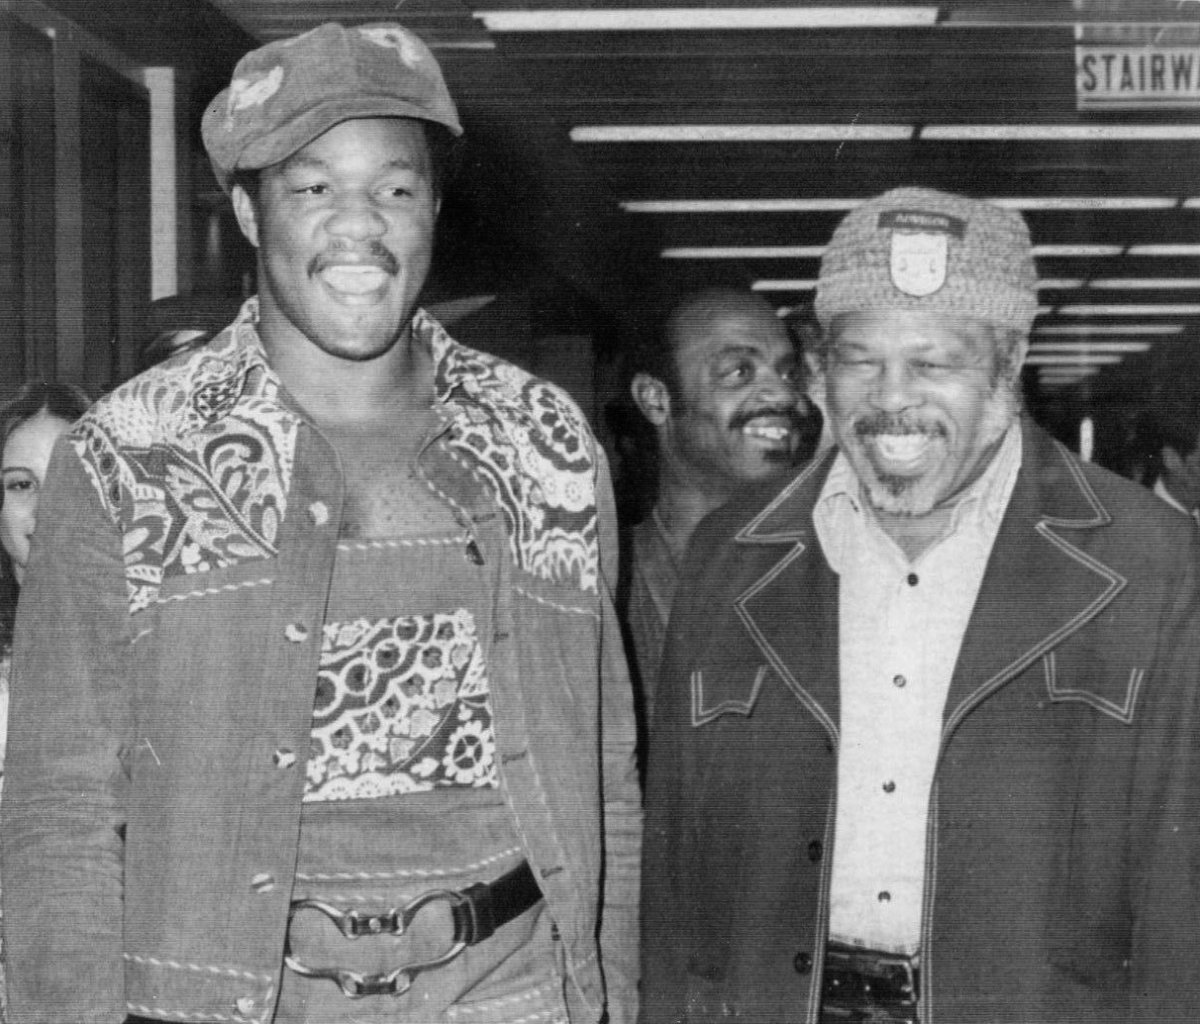 Foreman and his trainer, former champion Archie Moore, on their way to Kinshasa, 10 September 1974.